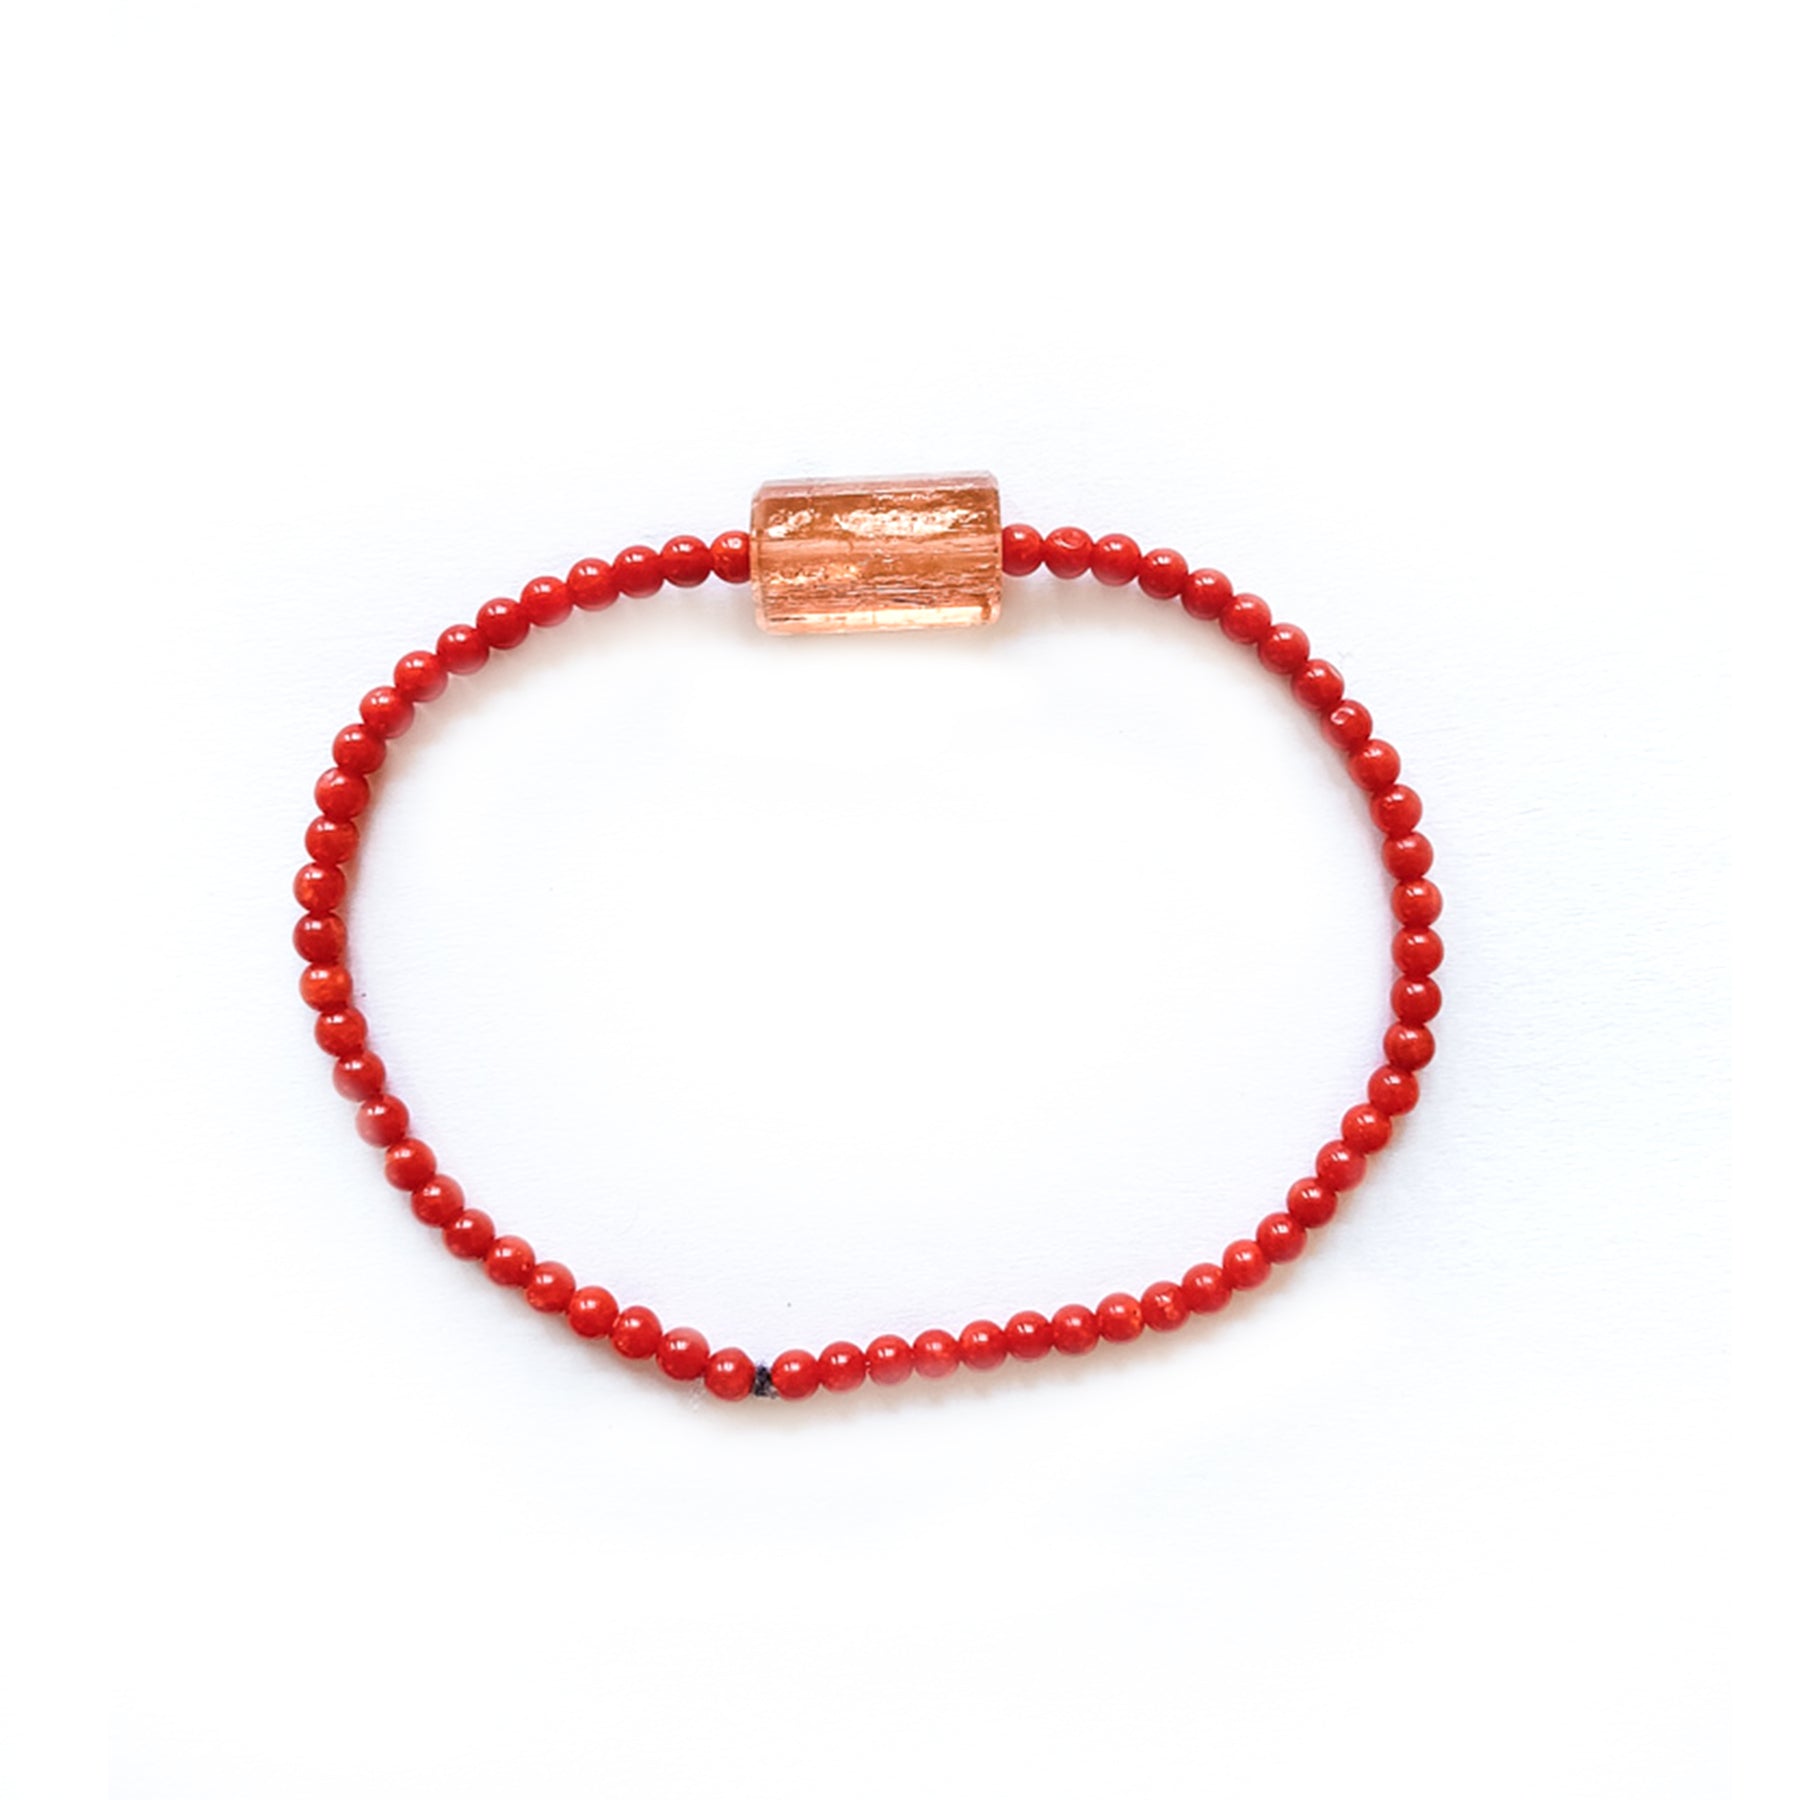 Imperial Topaz and Coral Bracelet